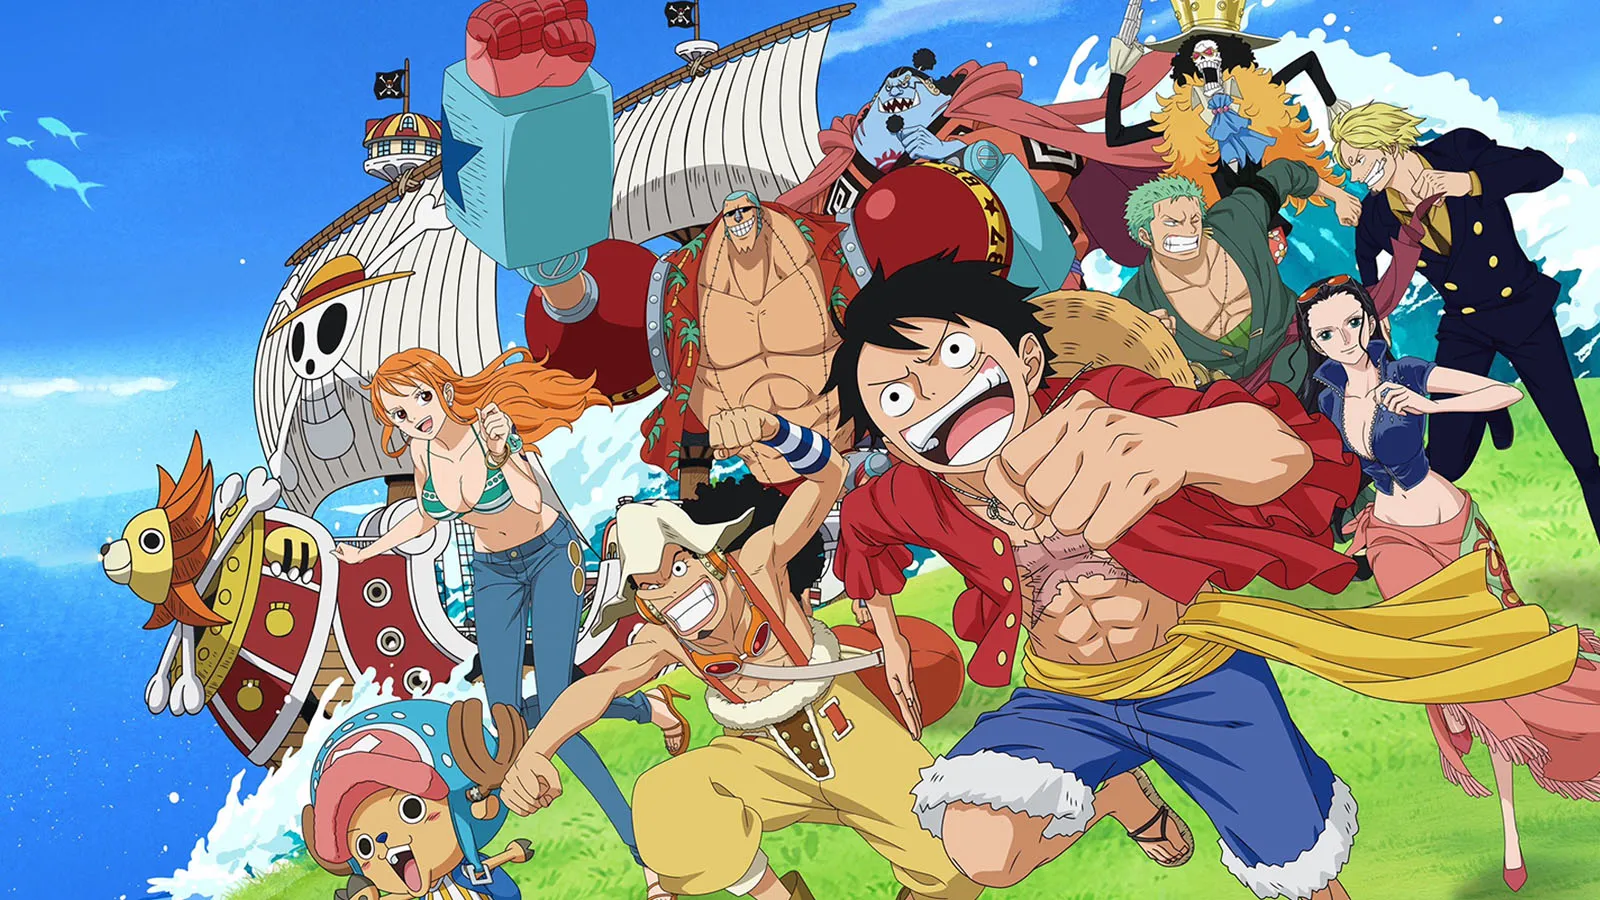 The Fate of Each Straw Hat Pirate, Had They Not Met Luffy